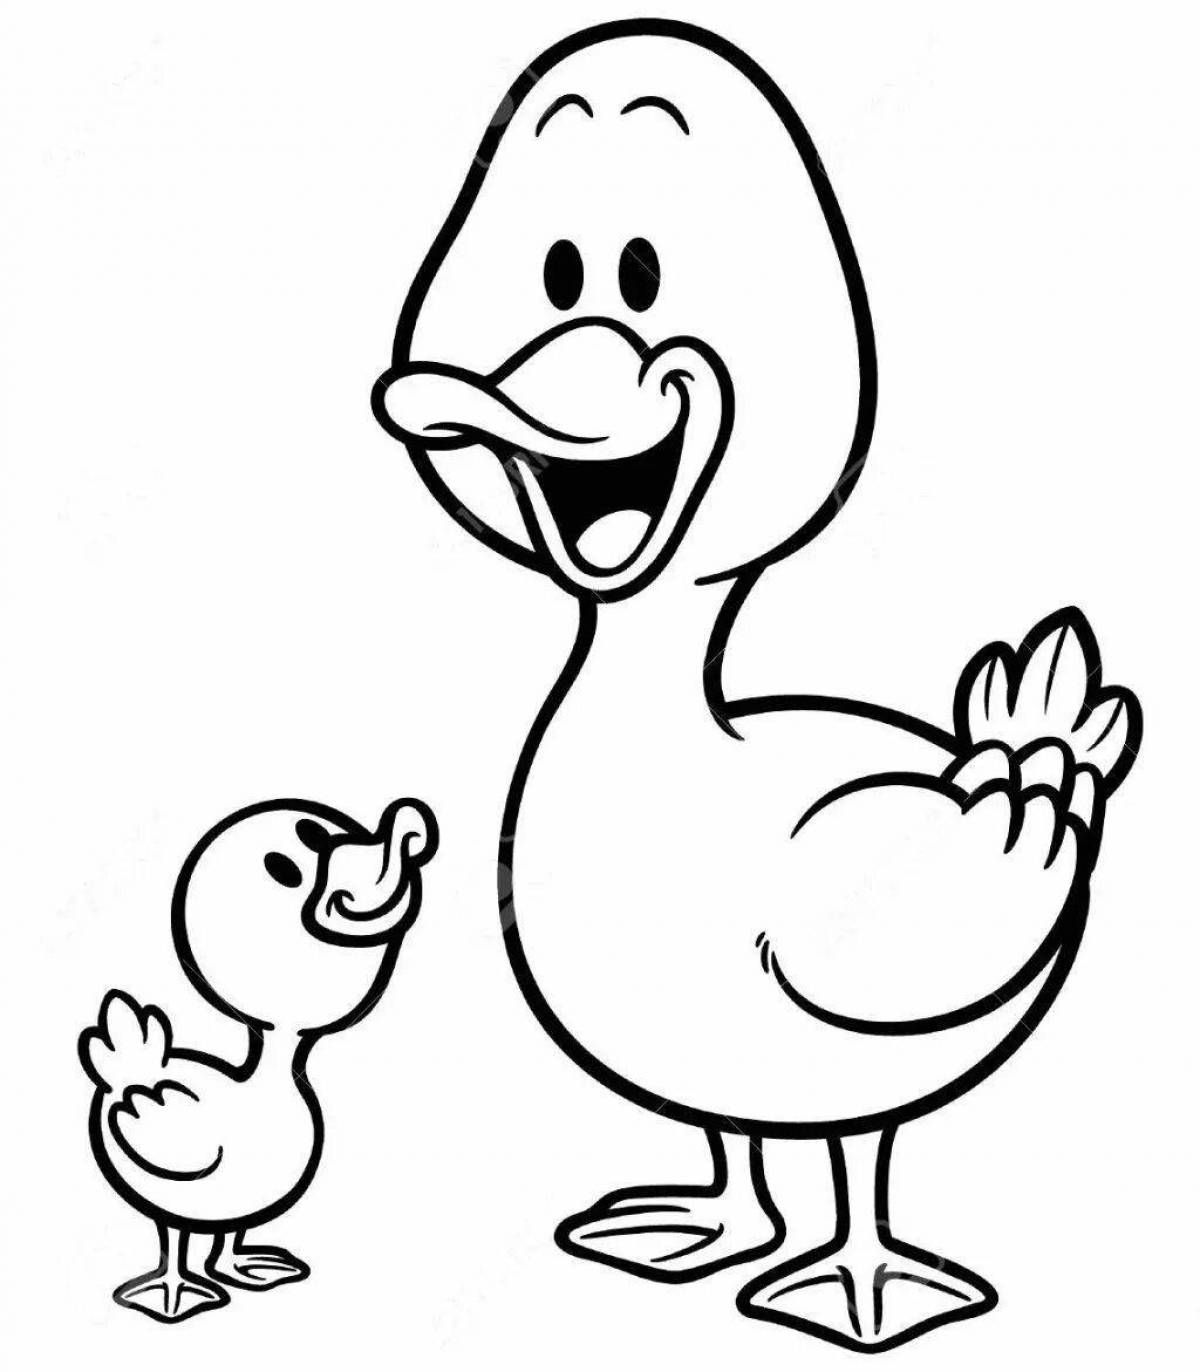 Coloring page playful squeezing duckling